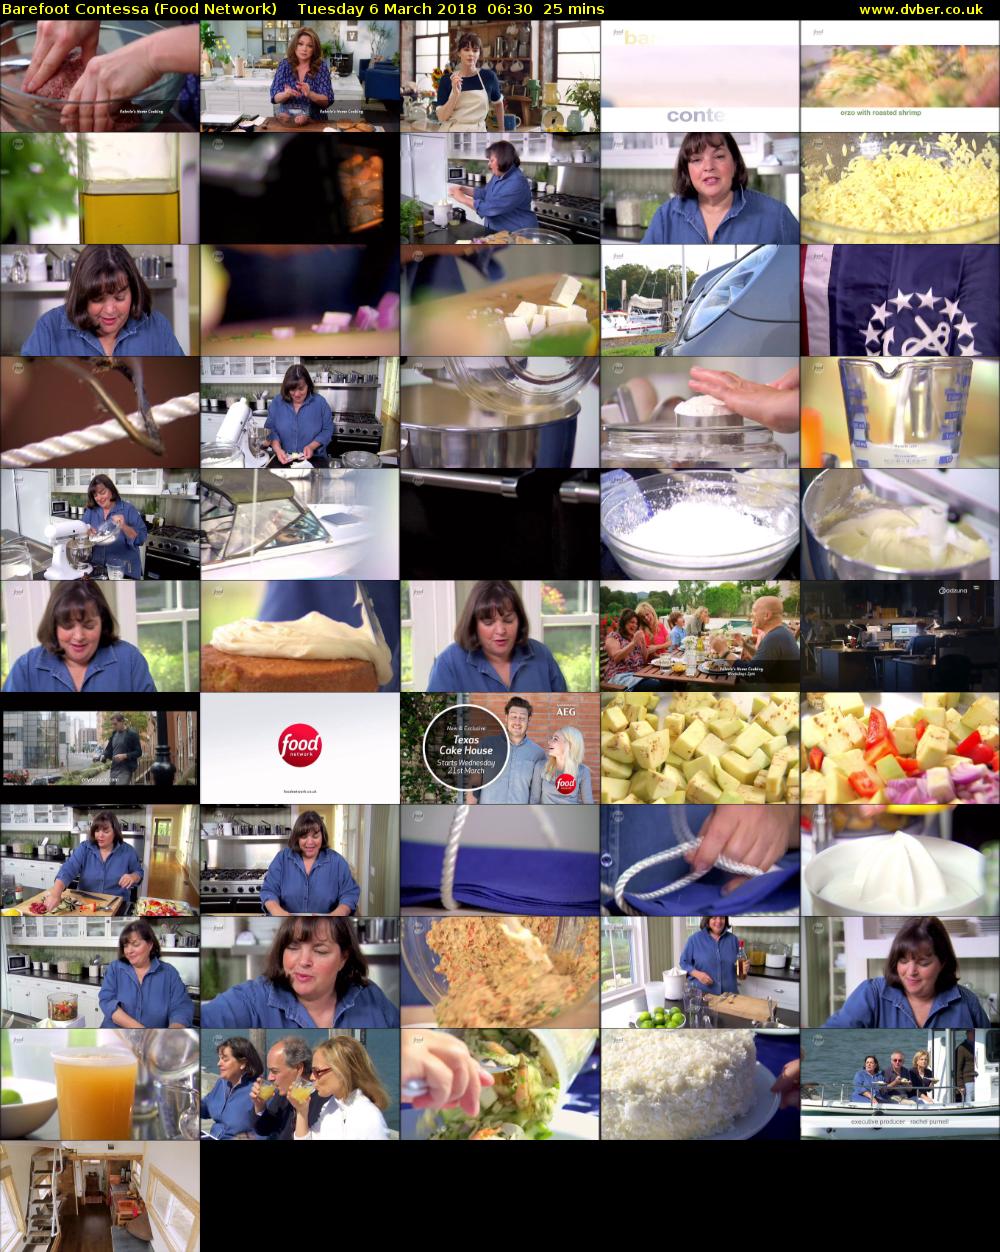 Barefoot Contessa (Food Network) Tuesday 6 March 2018 06:30 - 06:55